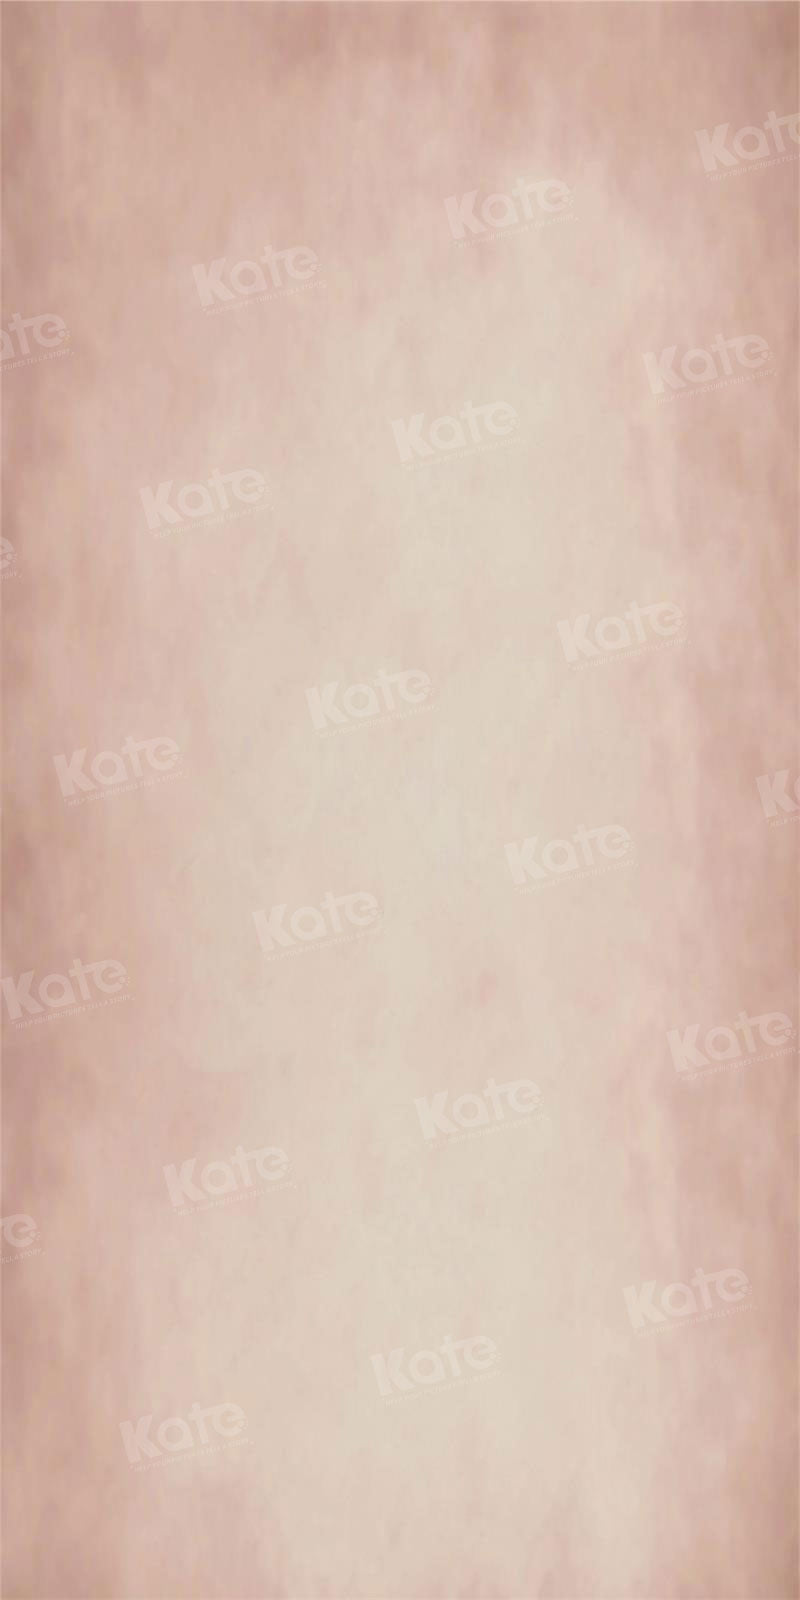 Kate Sweep Abstract Light Pink Backdrop for Photography